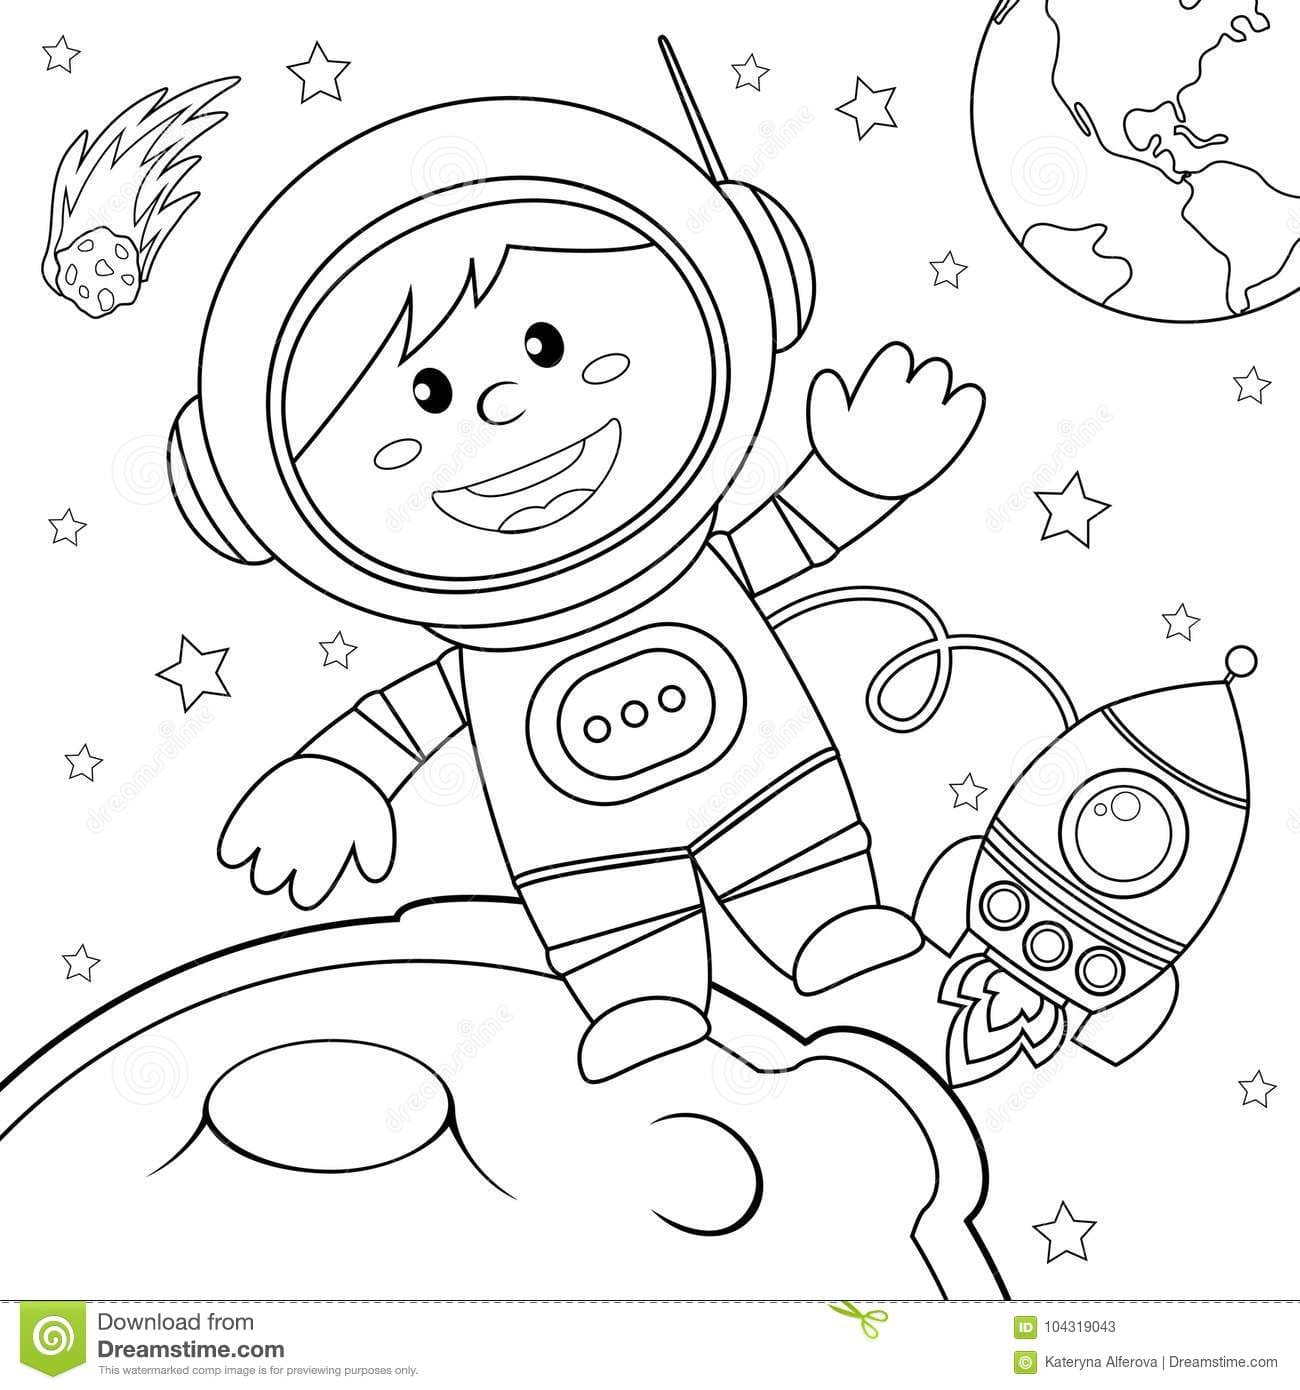 Black and white vector illustration for coloring book